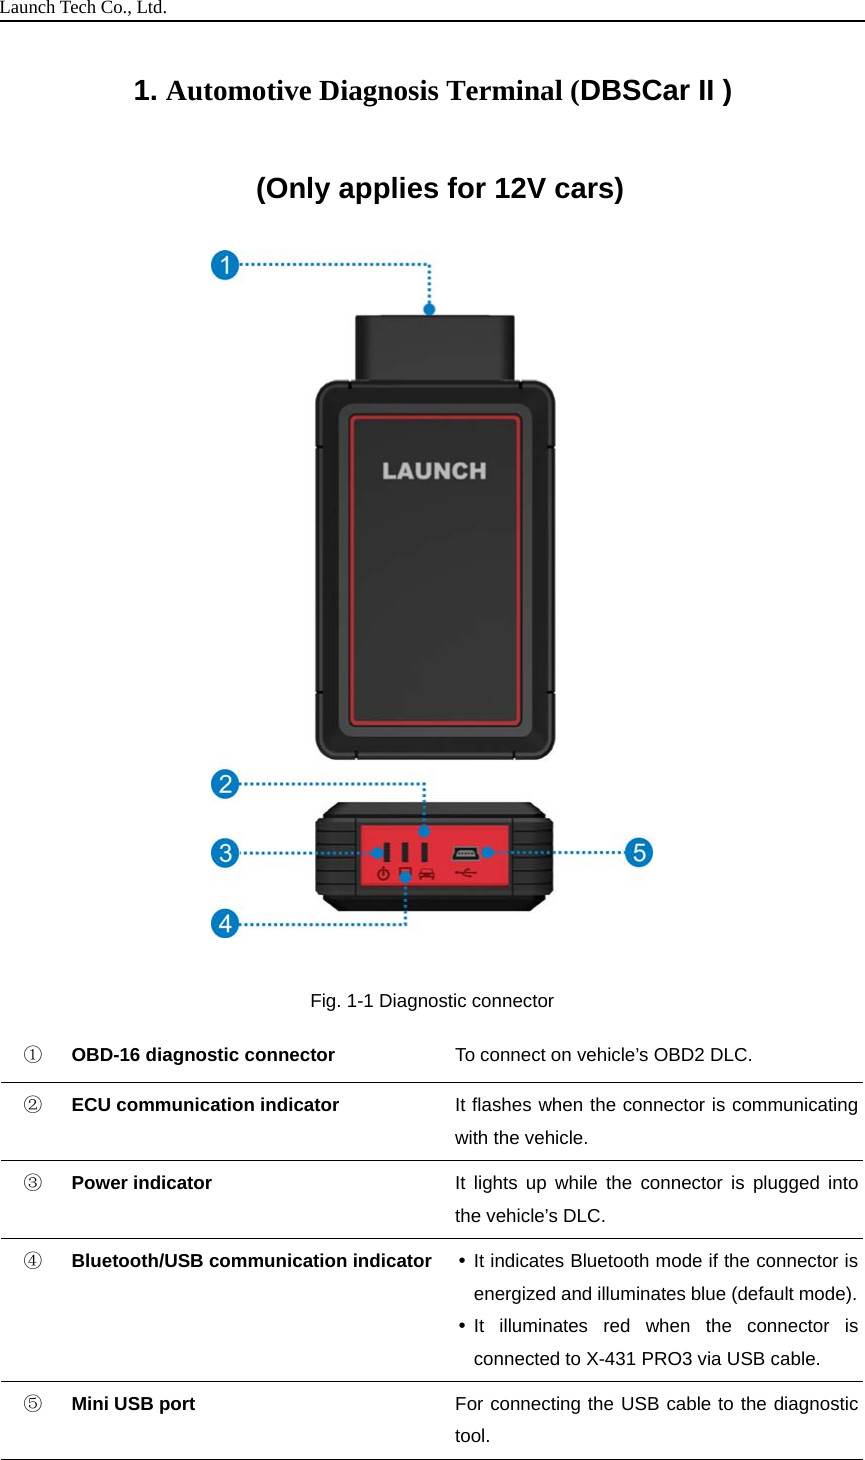 Launch Tech Co., Ltd.1. Automotive Diagnosis Terminal (DBSCar II )(Only applies for 12V cars)Fig. 1-1 Diagnostic connector①OBD-16 diagnostic connector To connect on vehicle’s OBD2 DLC.②ECU communication indicator It flashes when the connector is communicatingwith the vehicle.③Power indicator It lights up while the connector is plugged intothe vehicle’s DLC.④Bluetooth/USB communication indicator It indicates Bluetooth mode if the connector isenergized and illuminates blue (default mode).It illuminates red when the connector isconnected to X-431 PRO3 via USB cable.⑤Mini USB port For connecting the USB cable to the diagnostictool.